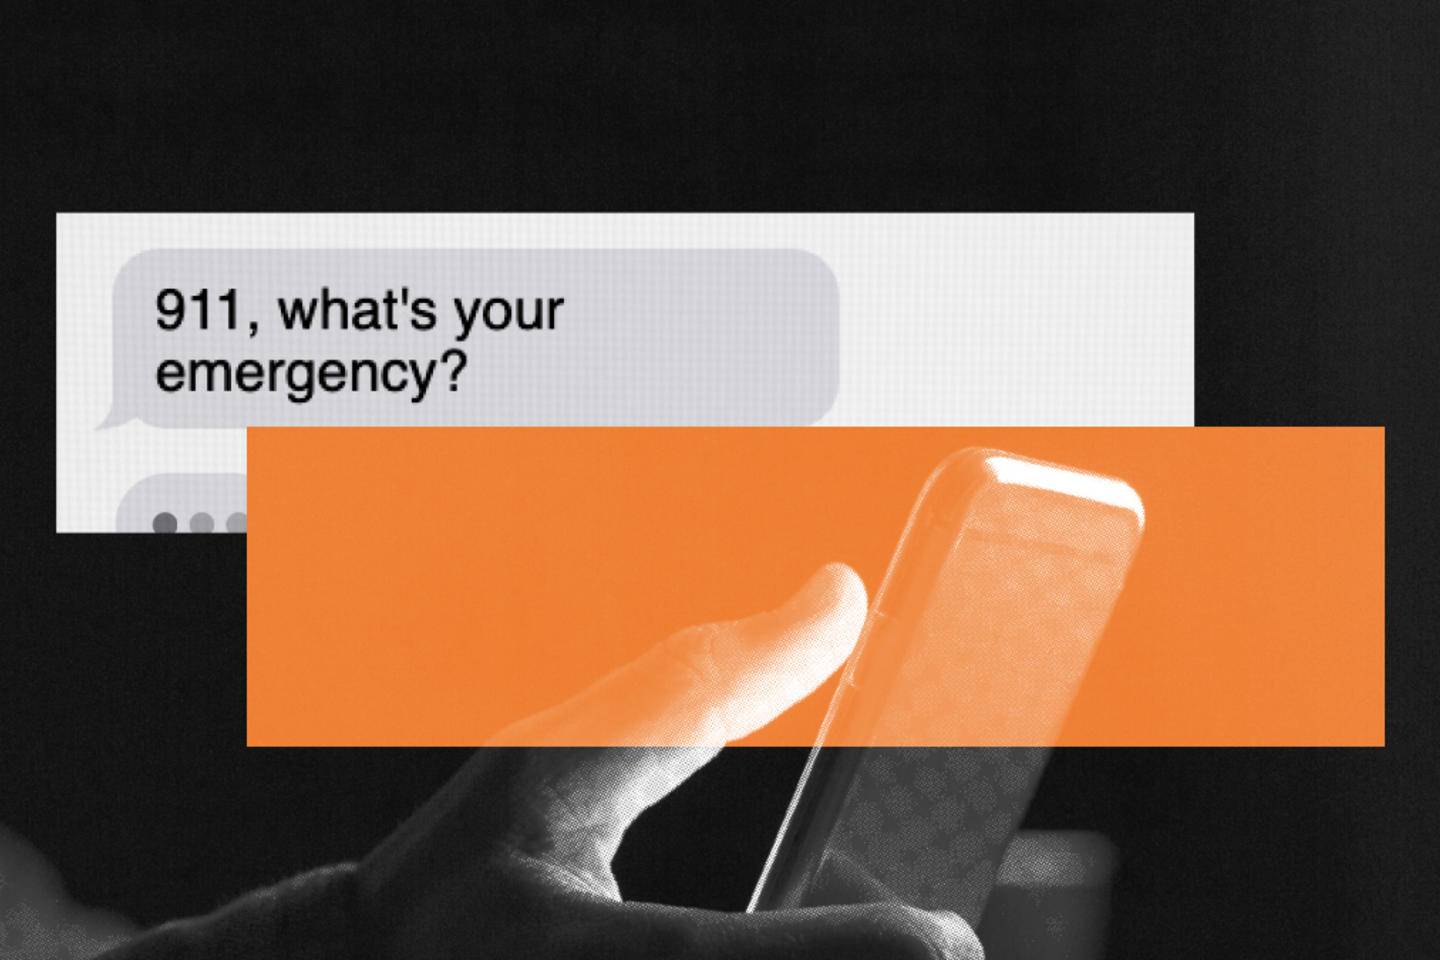 The image shows a text message that says "911 What's your emergency?" and a person holding a smartphone